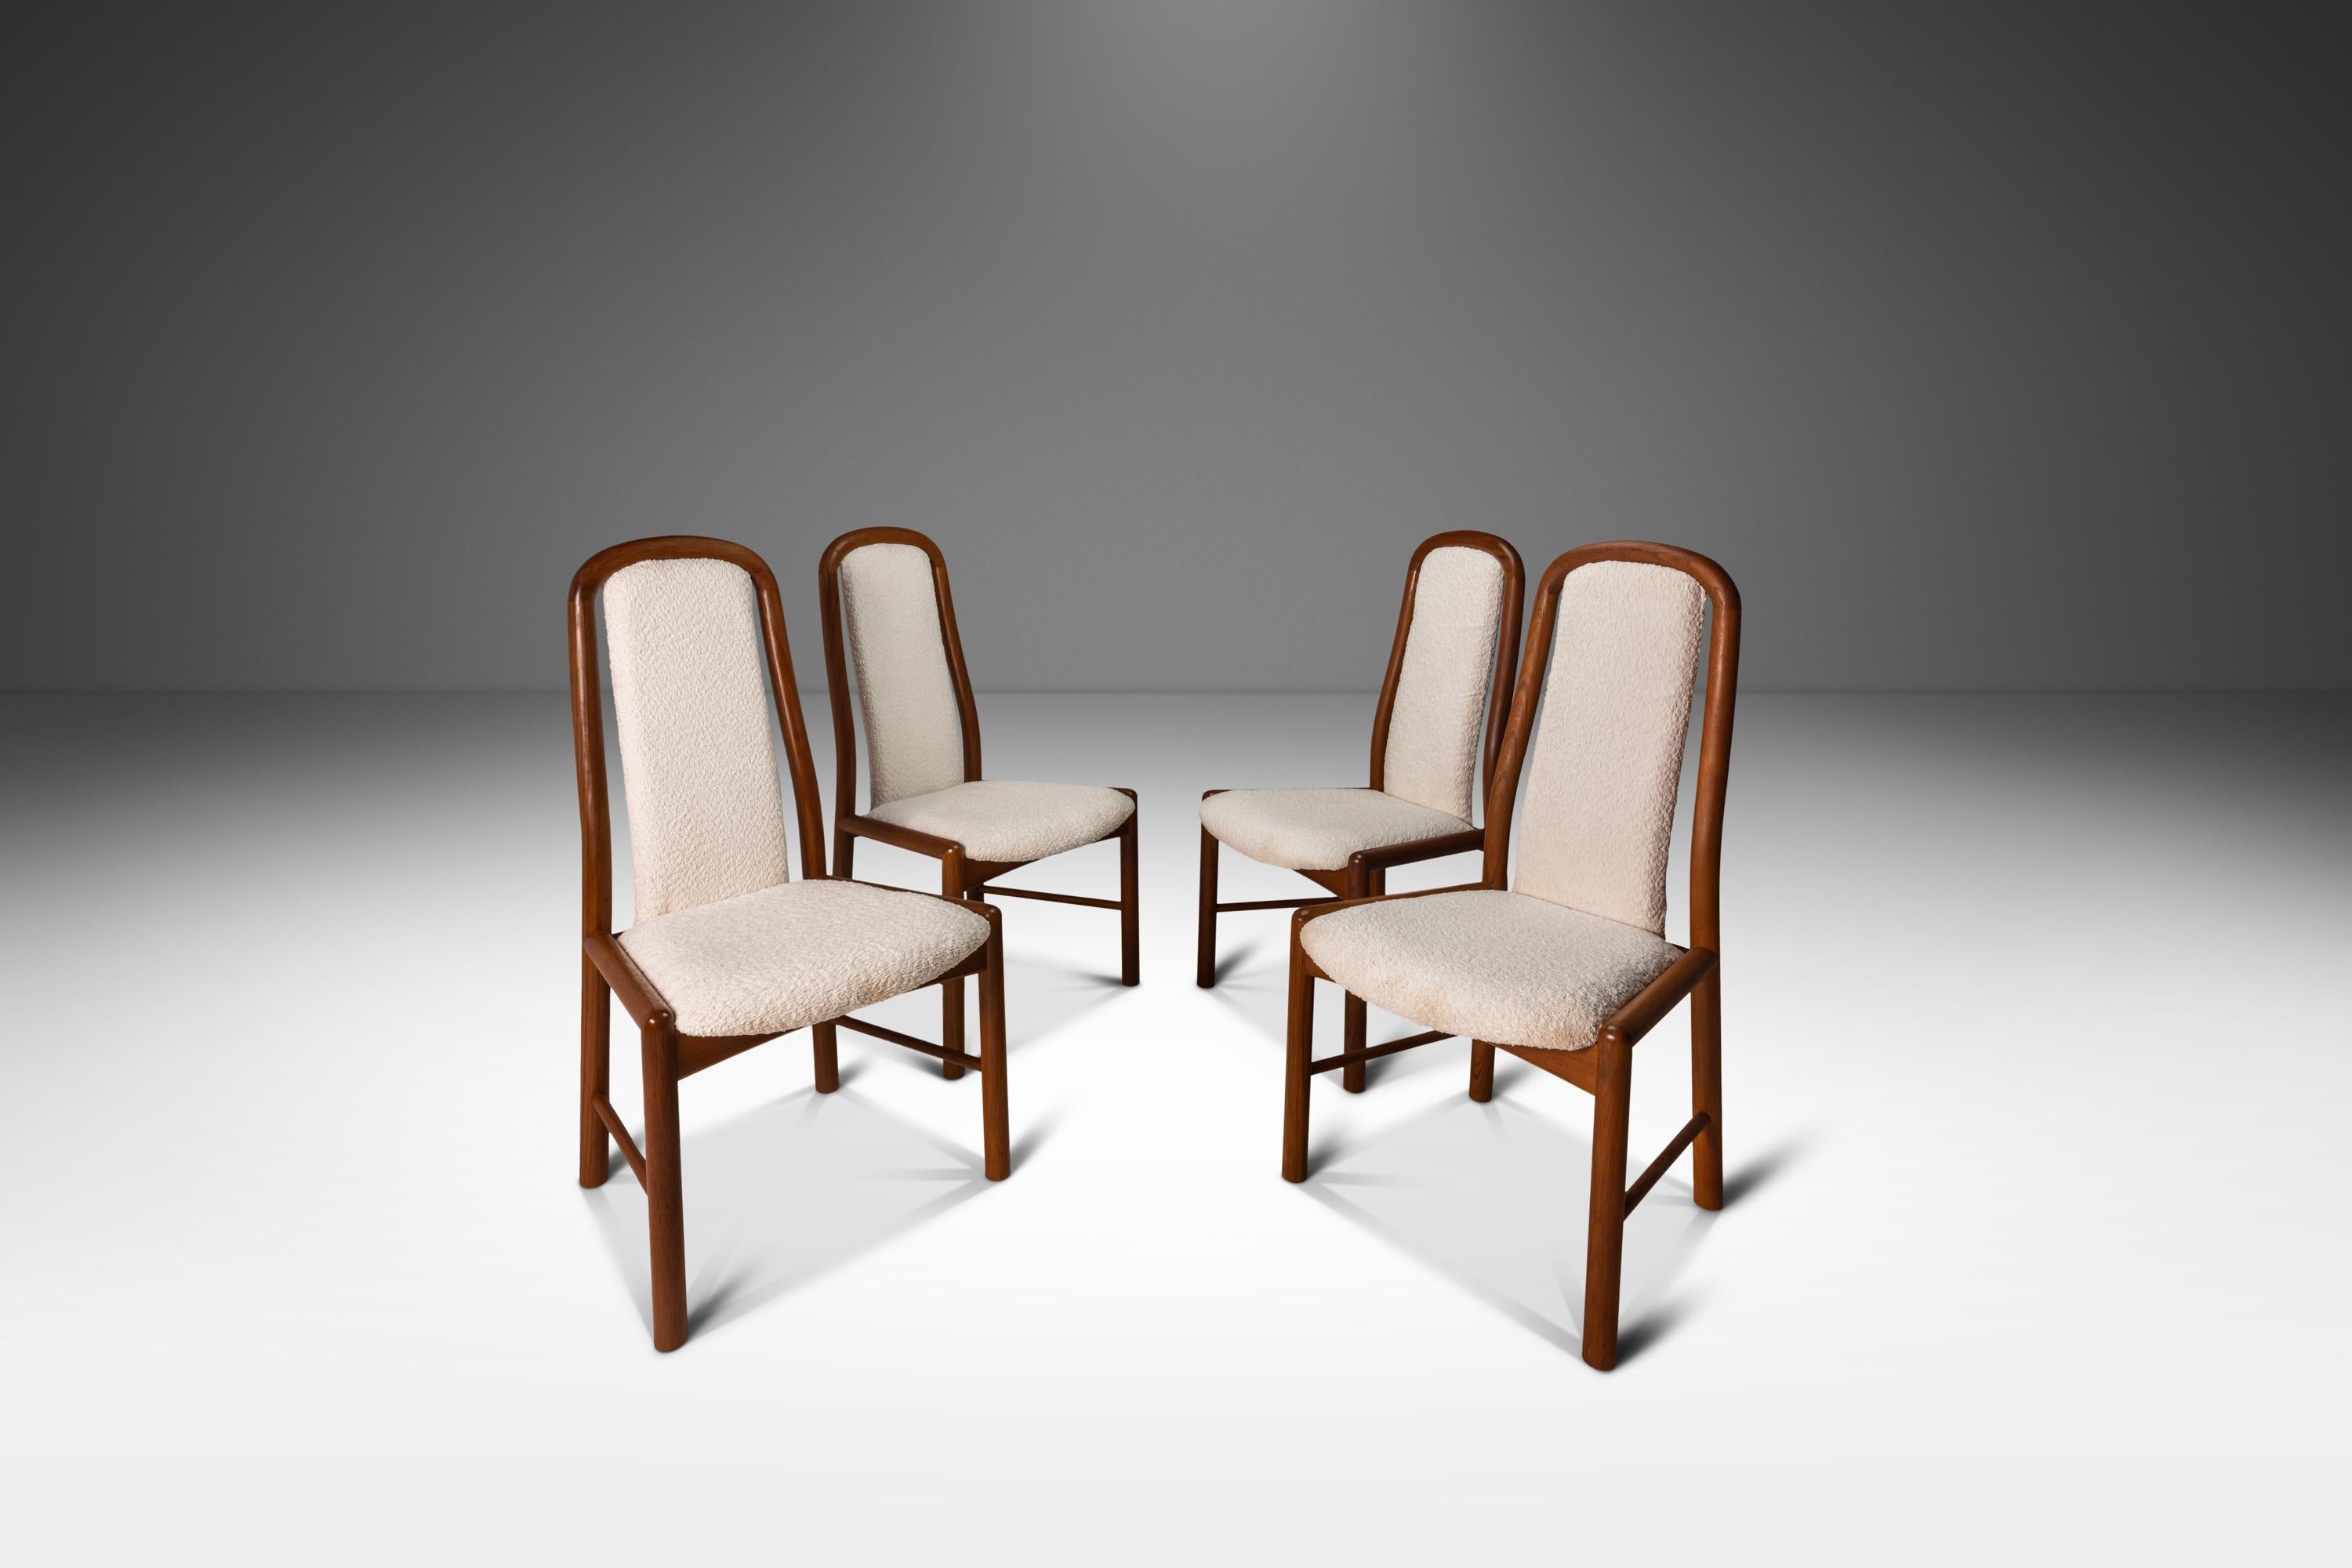 Introducing a set of four luxury dining chairs that embody the essence of Scandinavian design. Designed by Benny Linden, these chairs are the perfect combination of function and form, drawing inspiration from both Uldum Møbelfabrik and Skovby